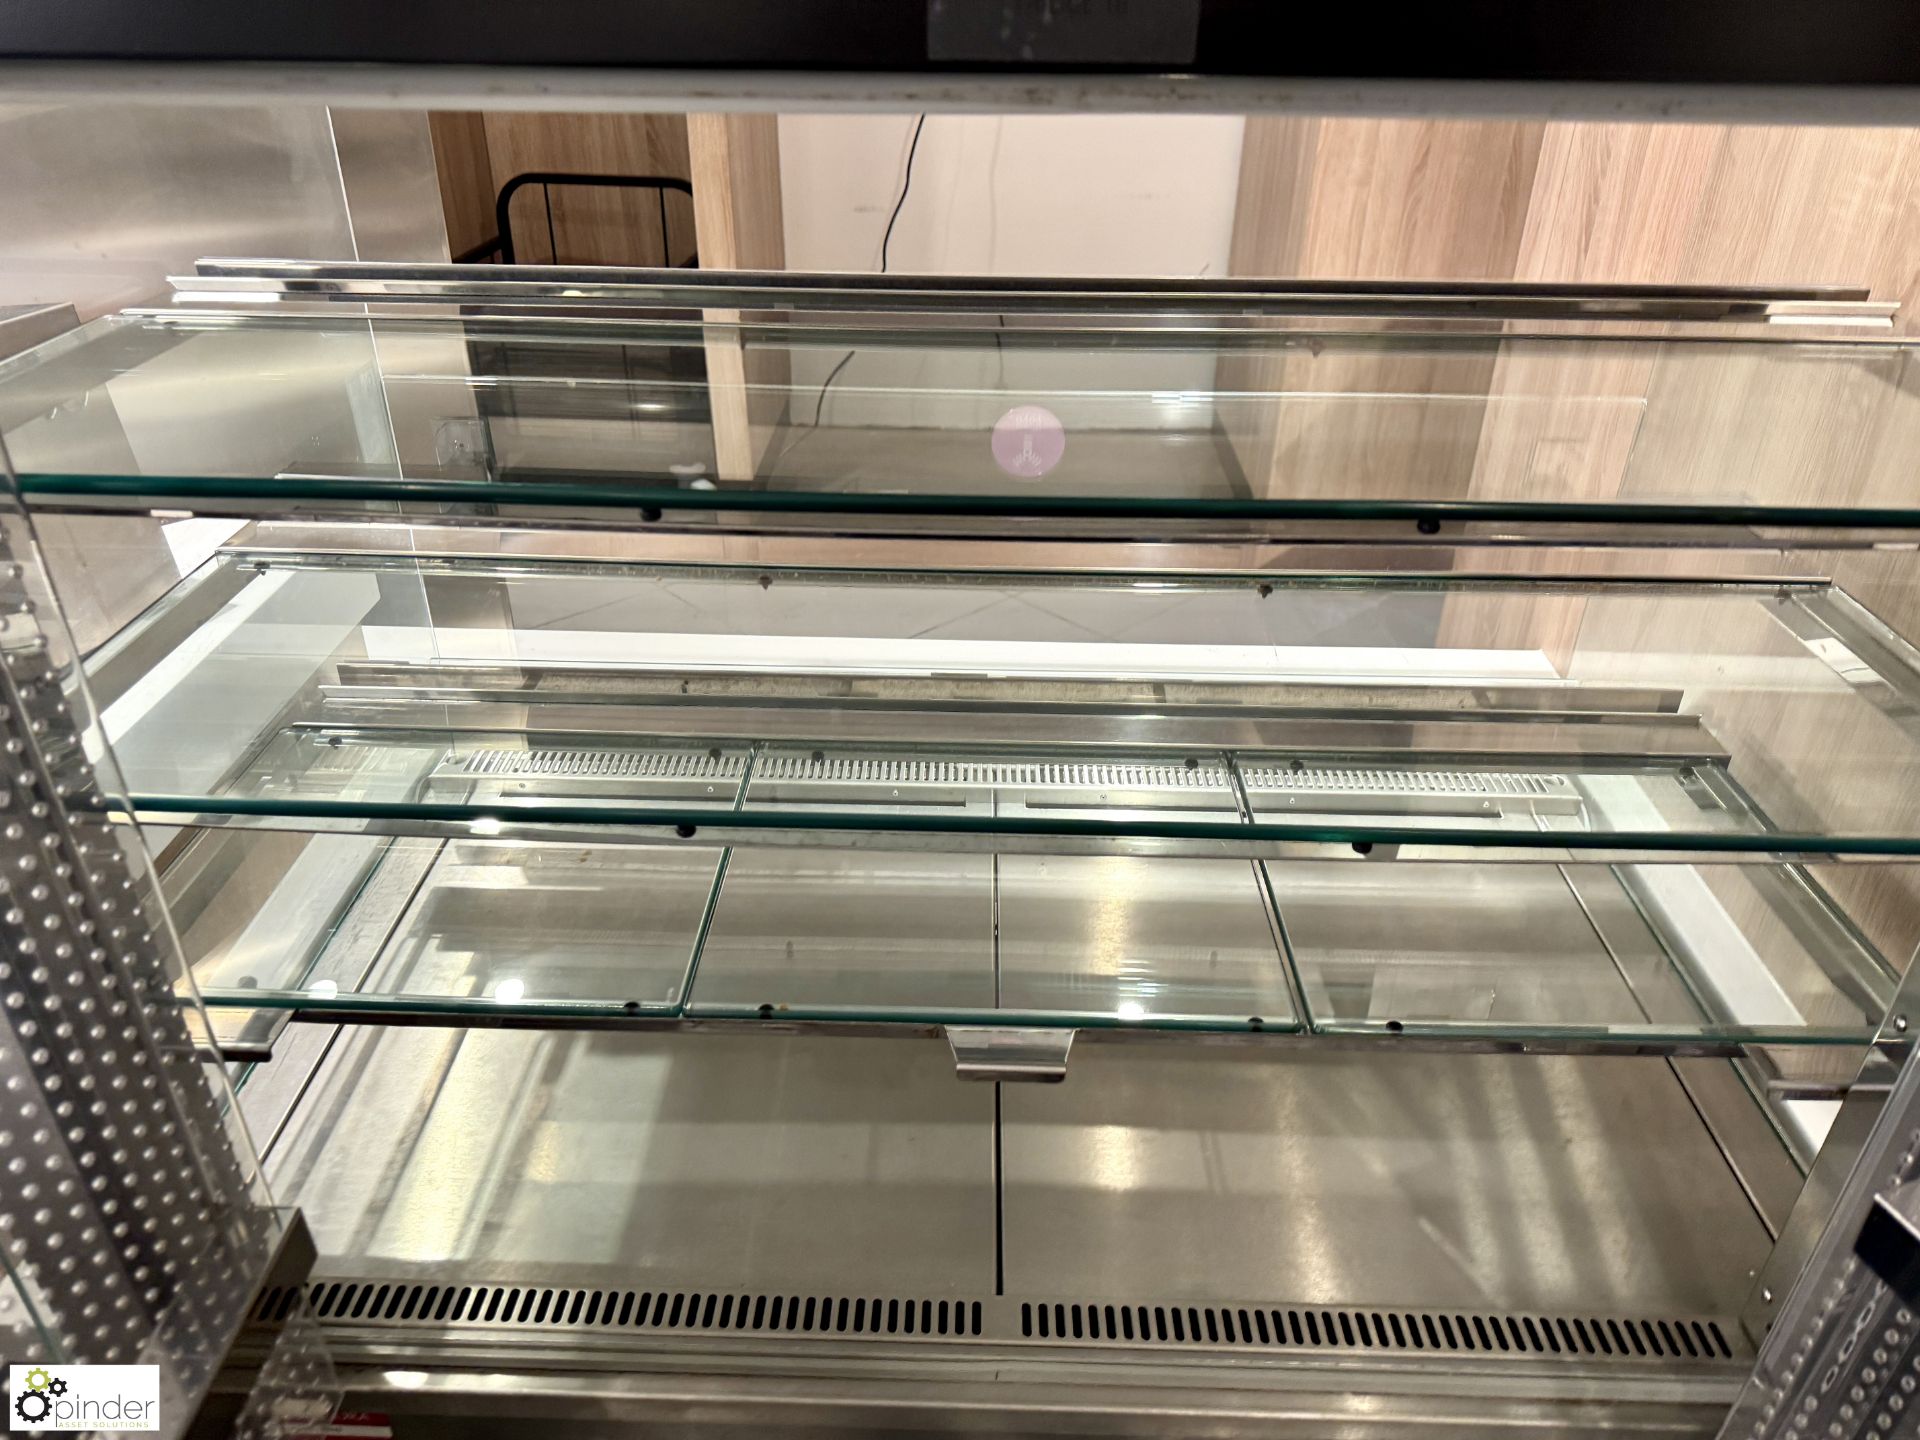 Dixell Chilled Display Unit, 240volts, 1200mm x 760mm x 1420mm (location in building - level 11 main - Bild 4 aus 6